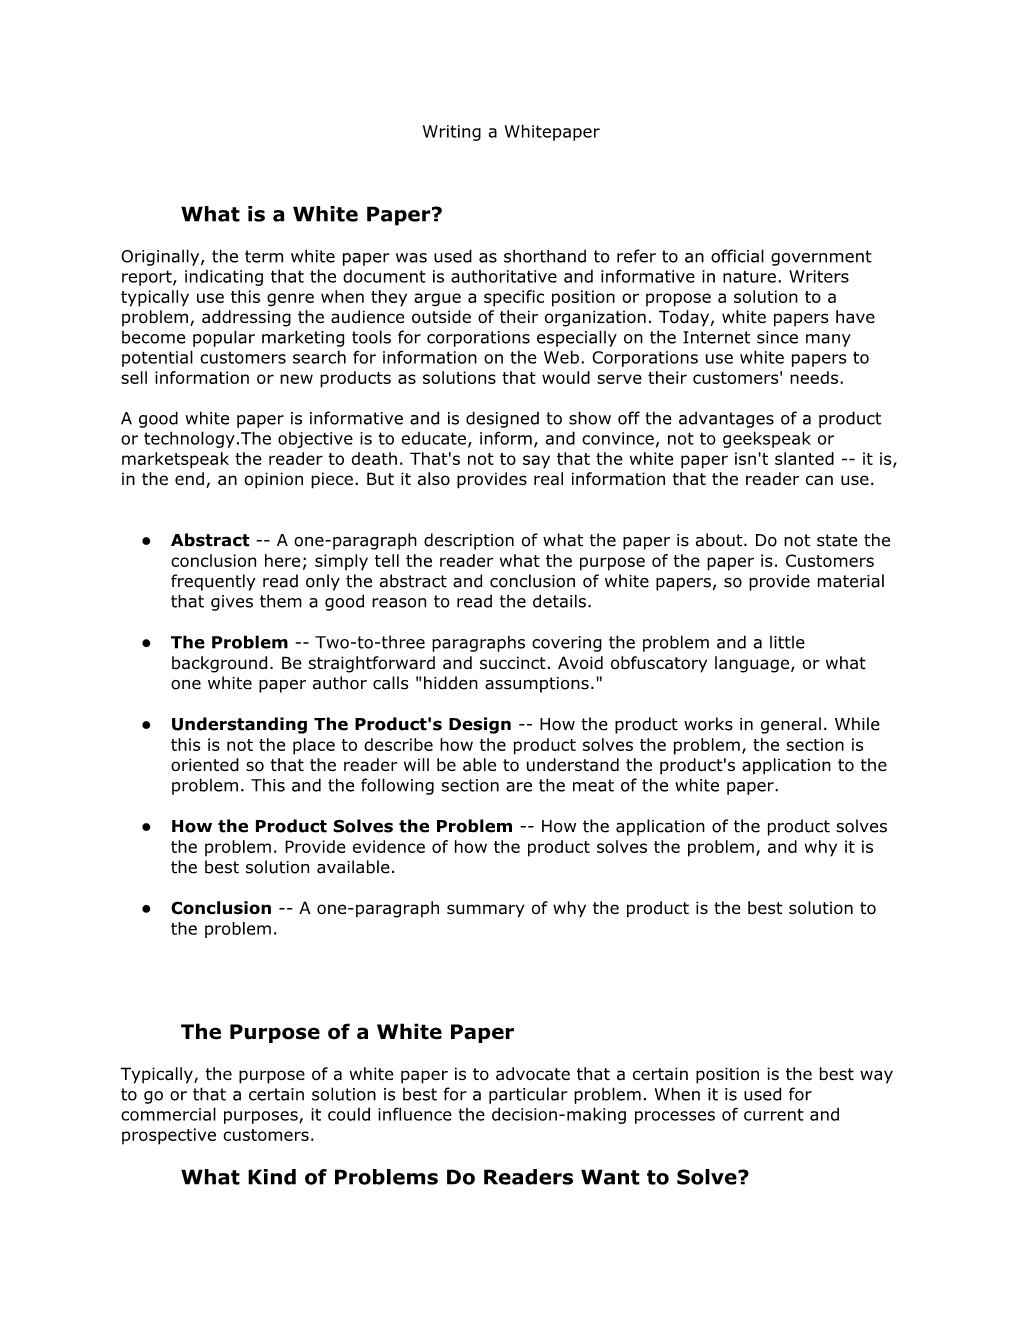 What Is a White Paper?